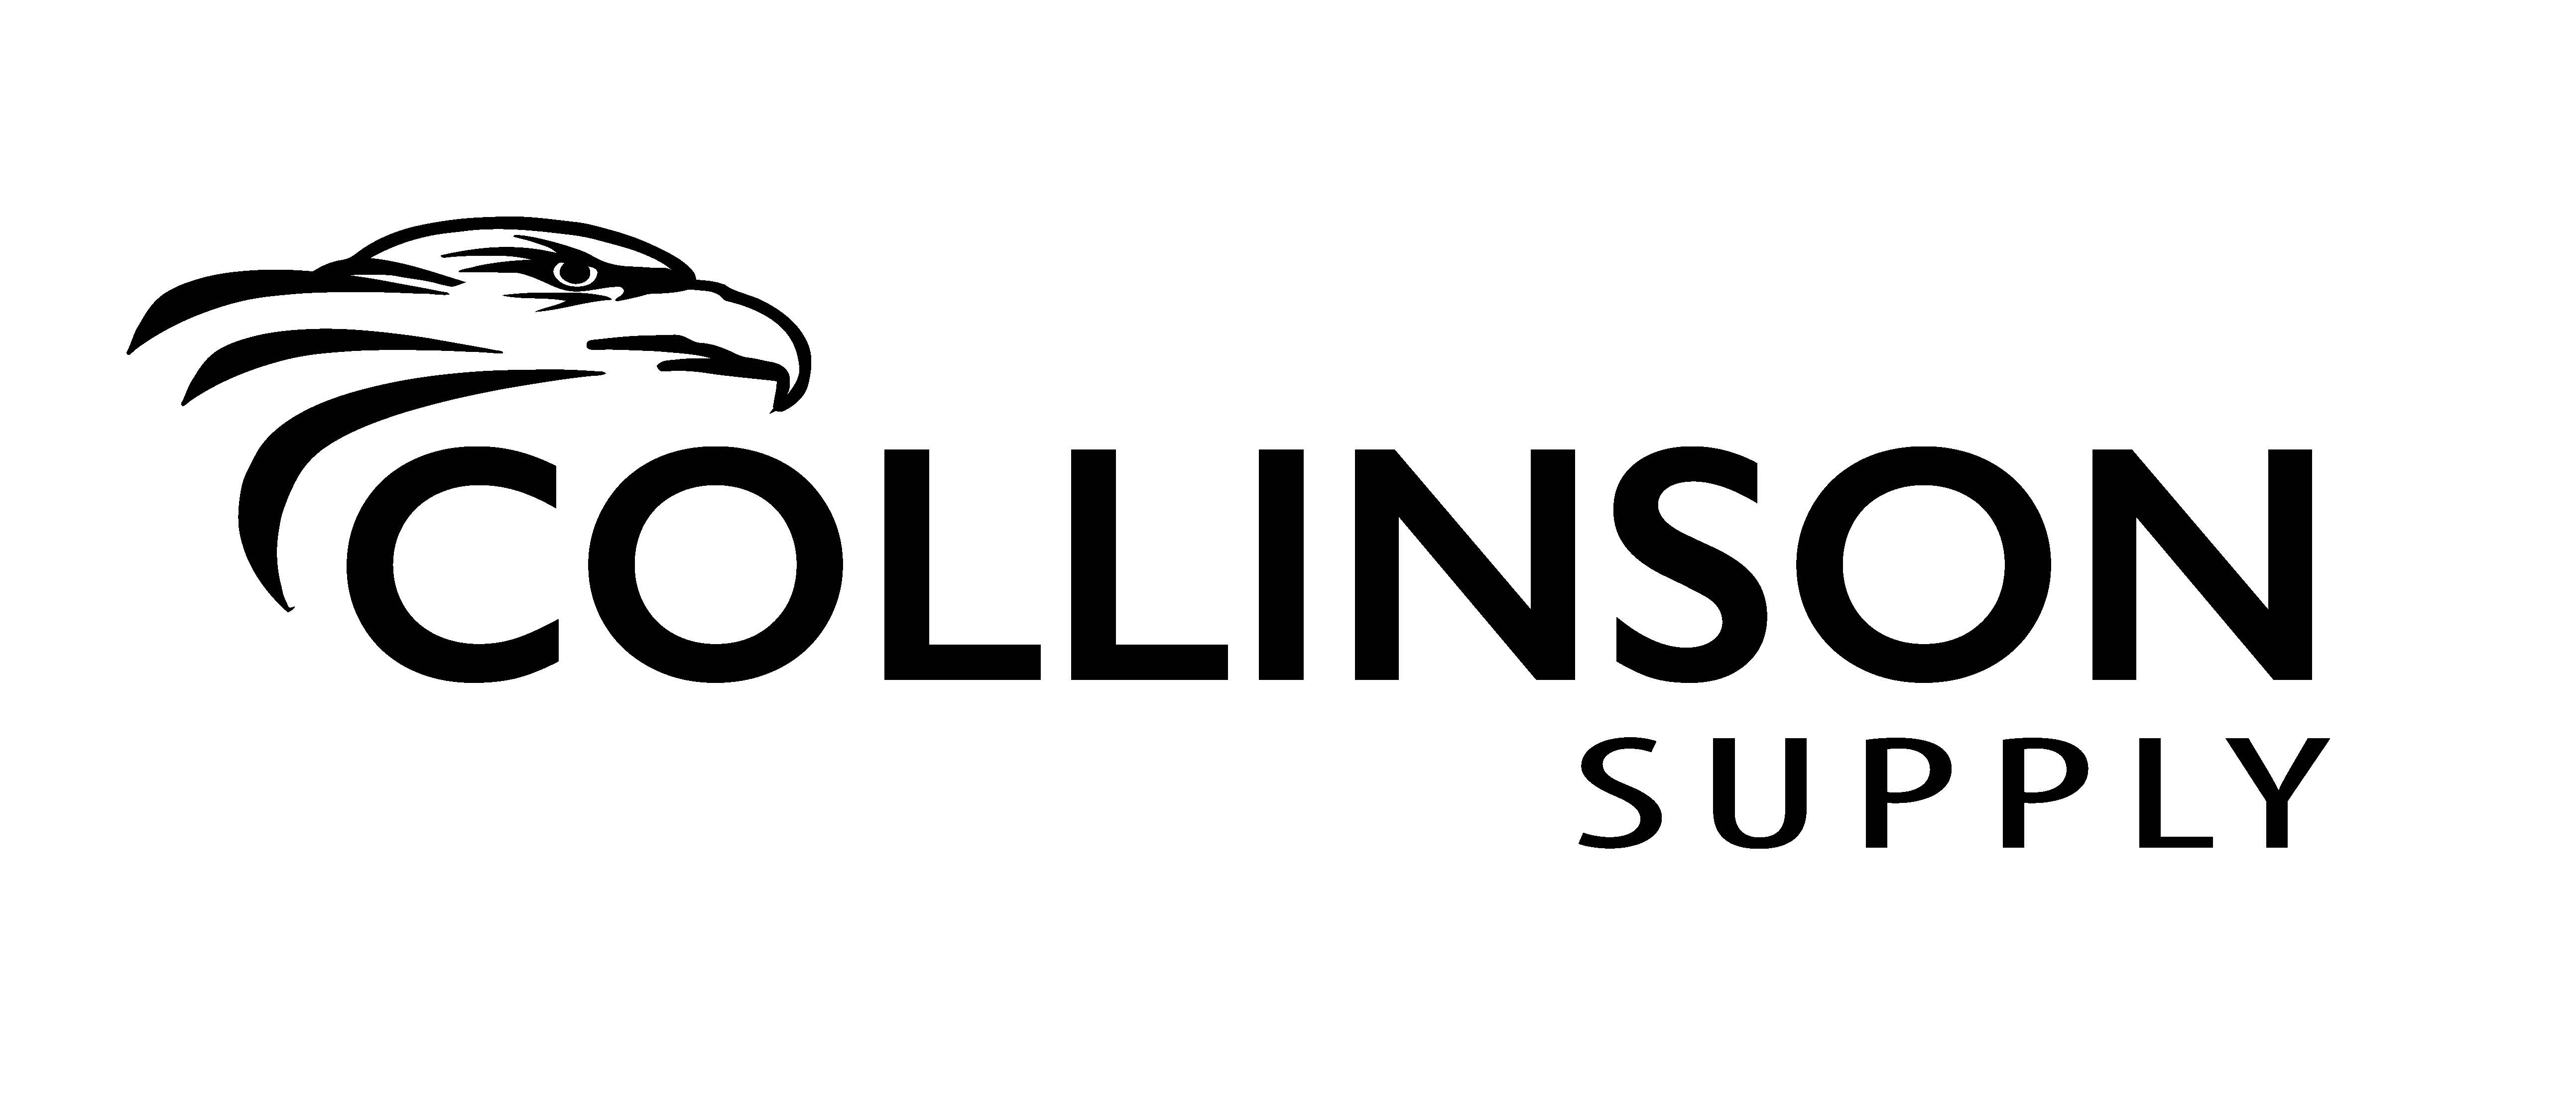 Product Results - Collinson Supply